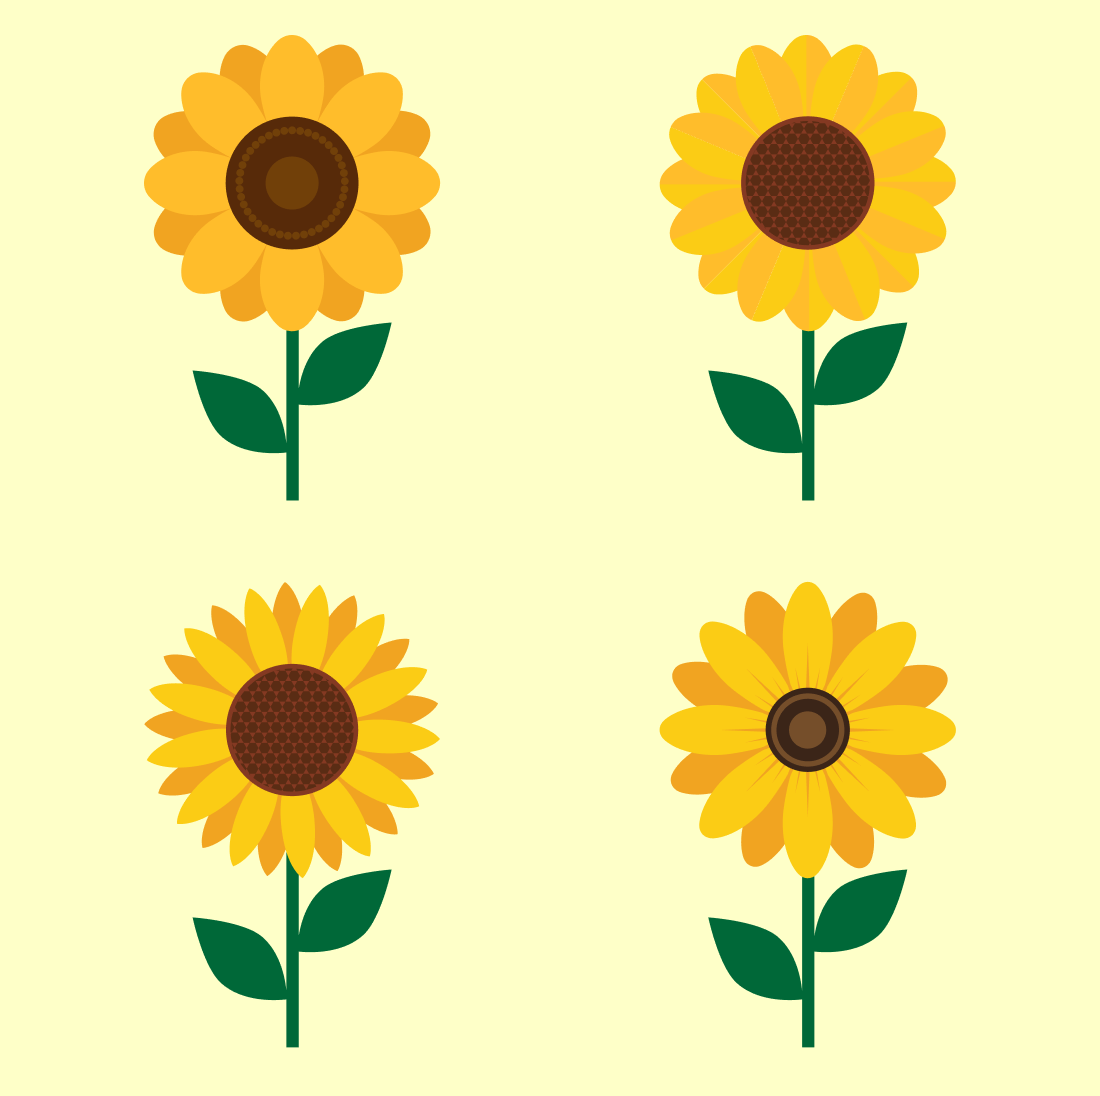 Sunflower SVG Free cover.